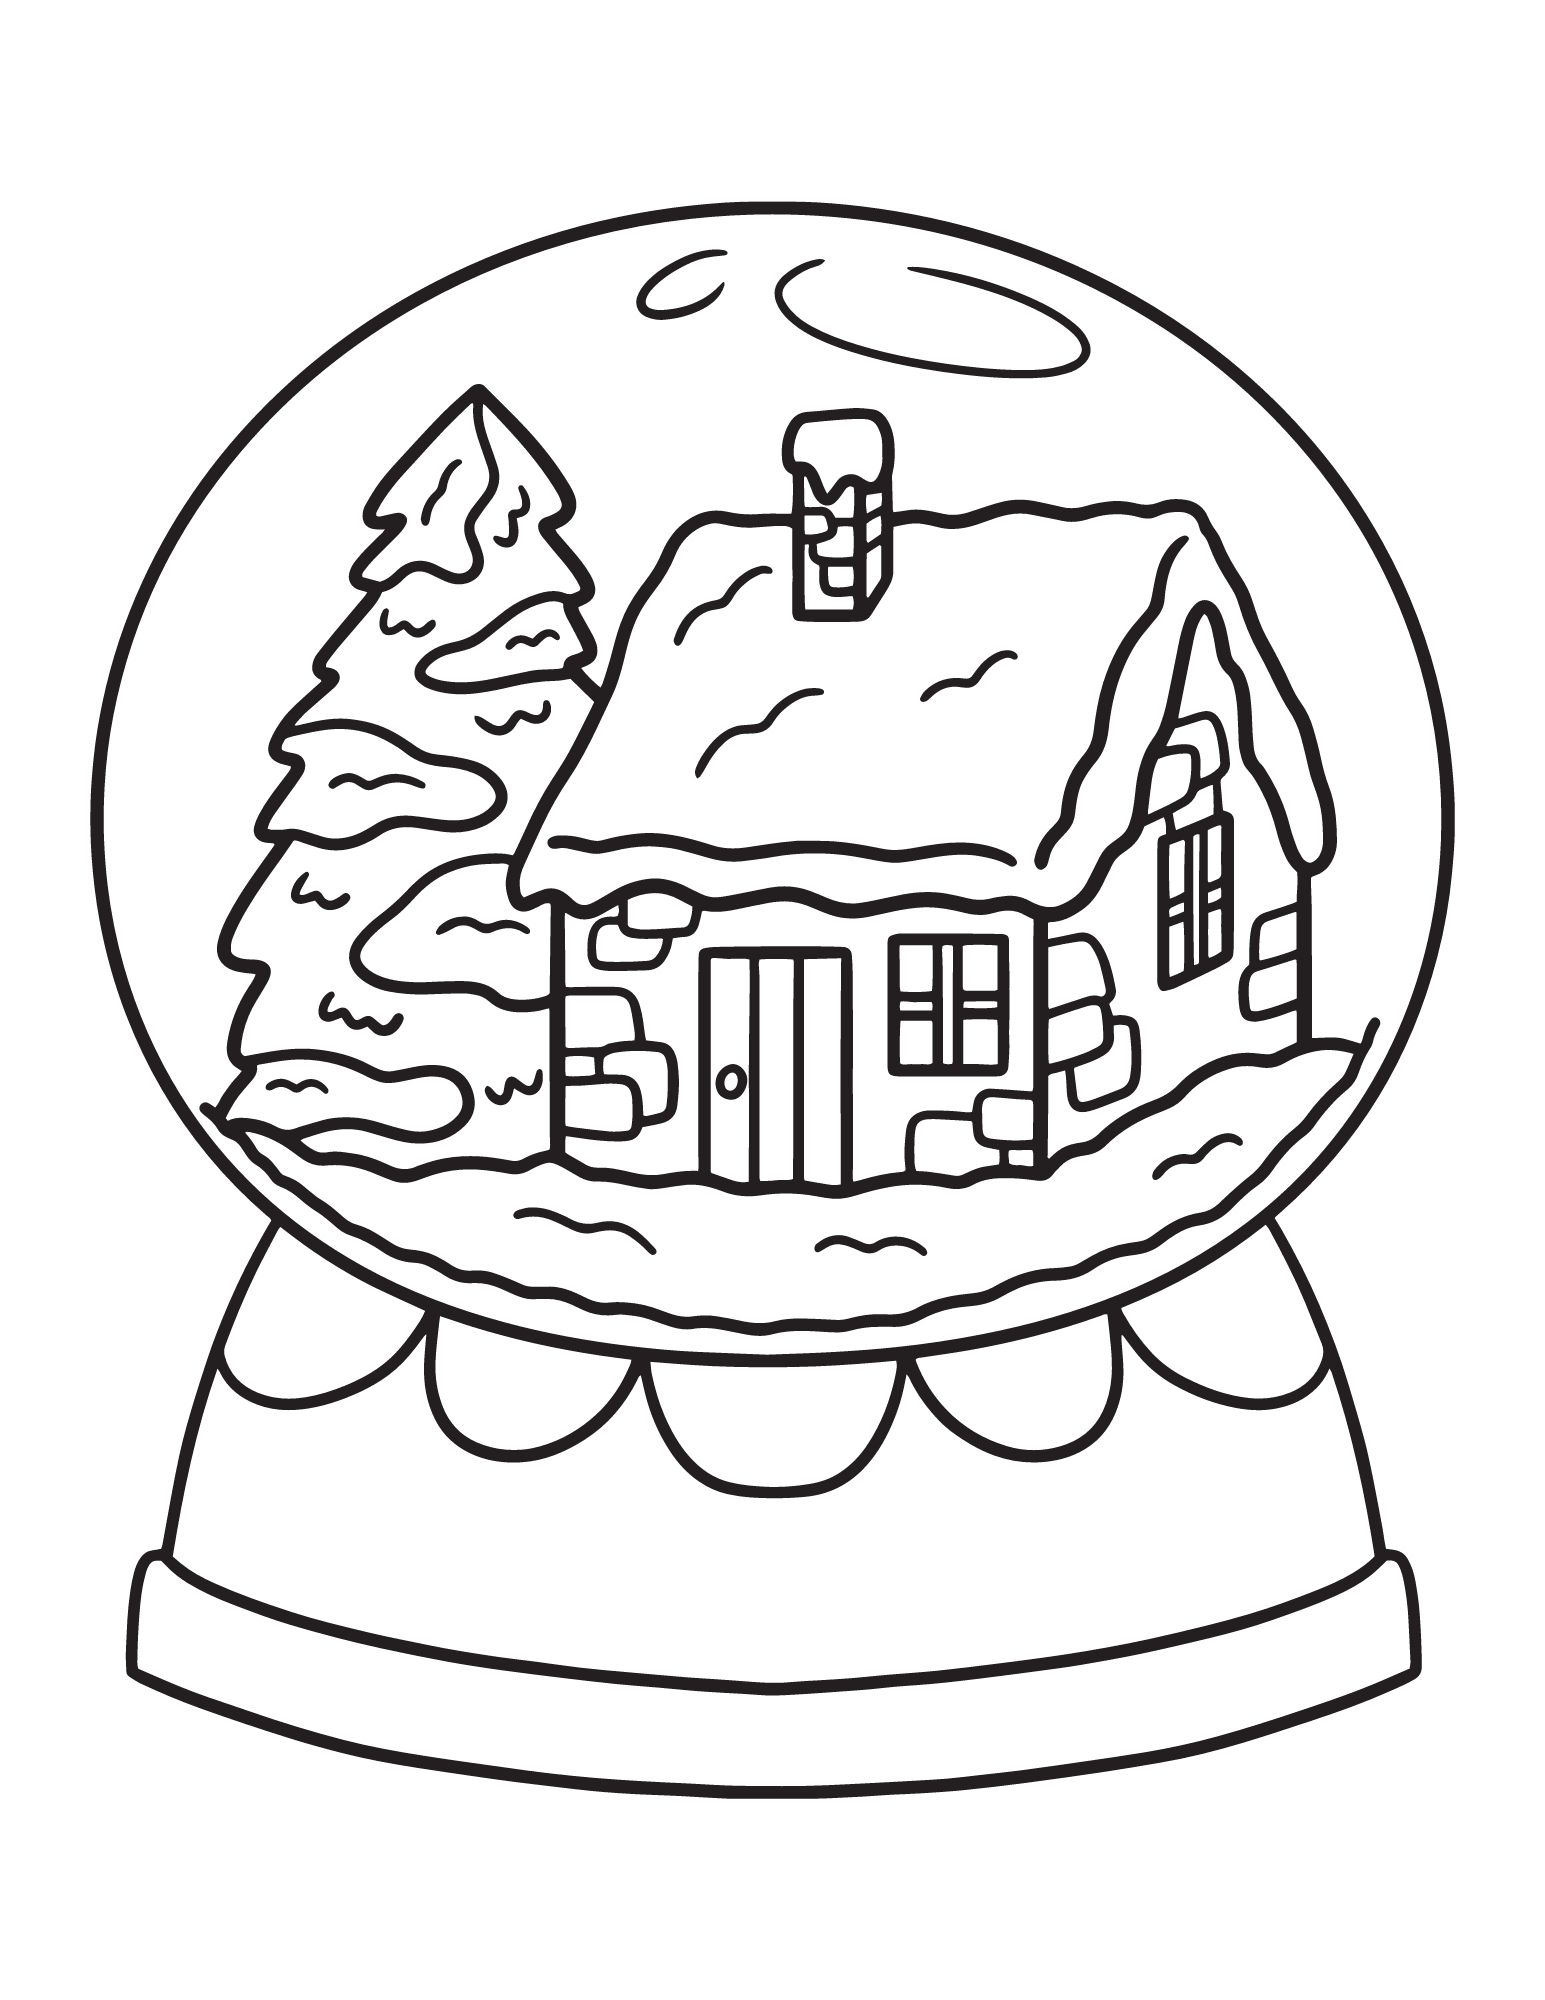 75 Free Printable Christmas Coloring Pages for Kids